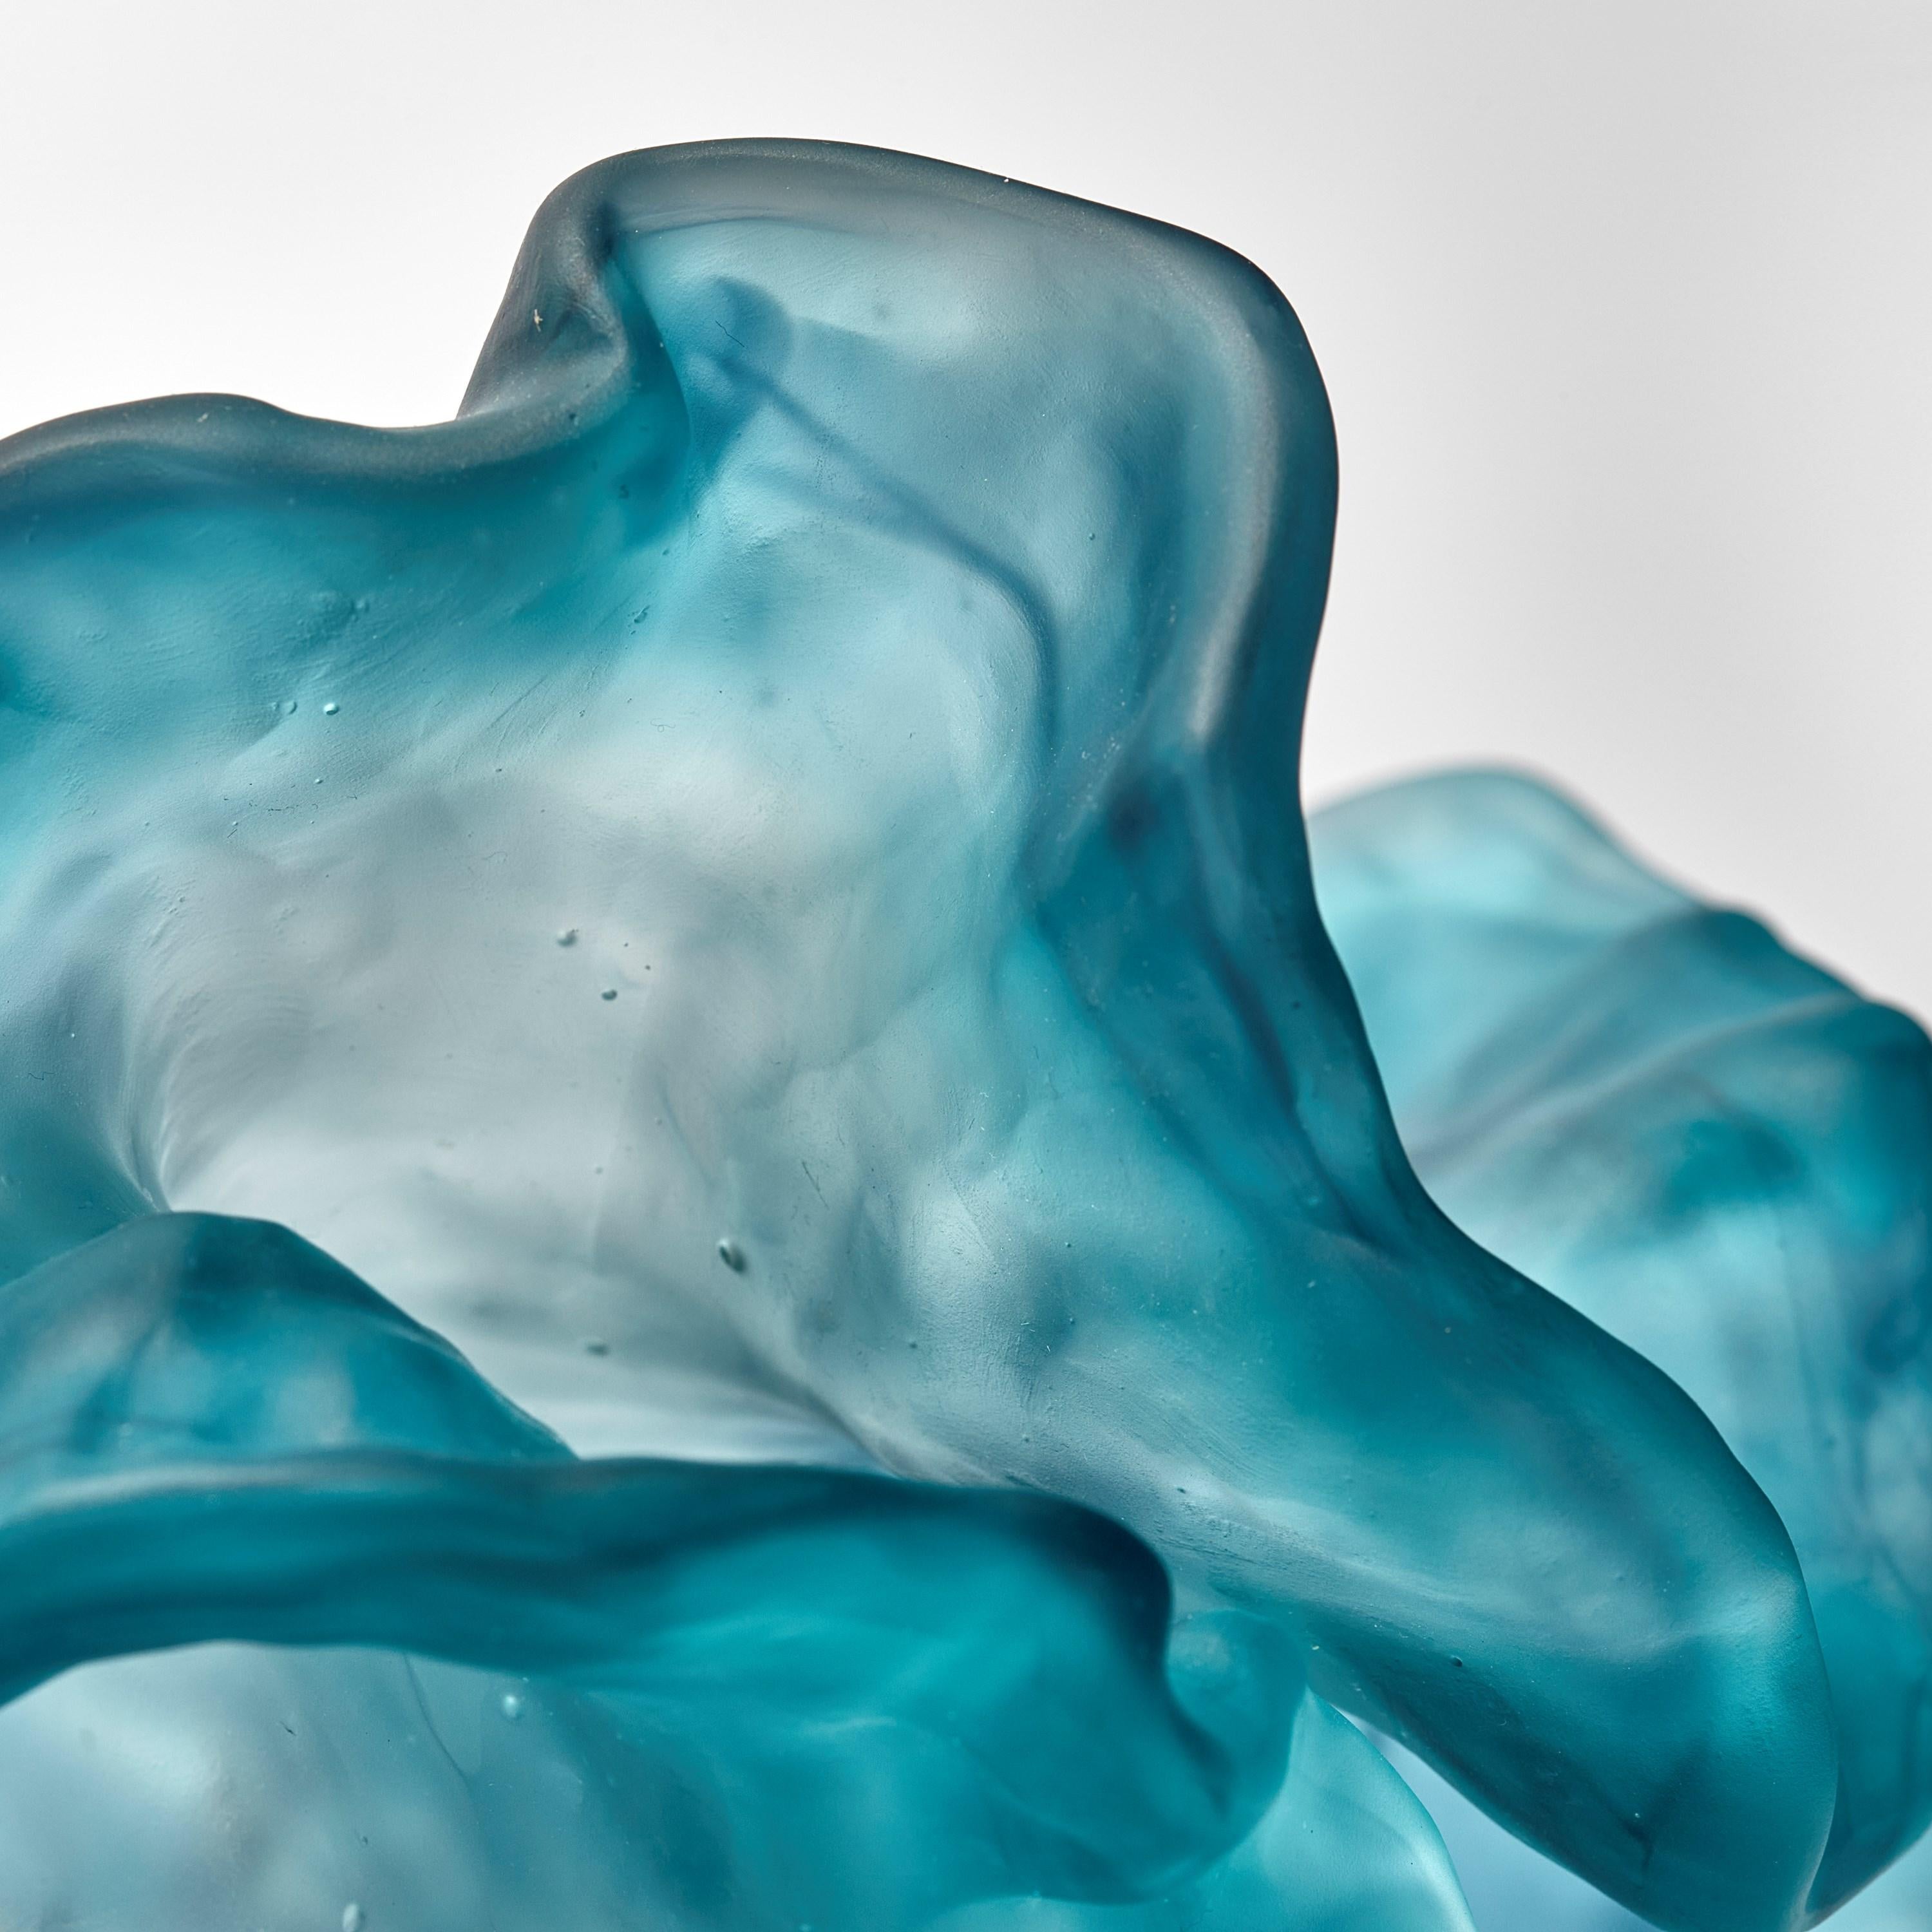 Blown Glass Floating Twist, teal blue cast glass ethereal organic artwork by Monette Larsen For Sale